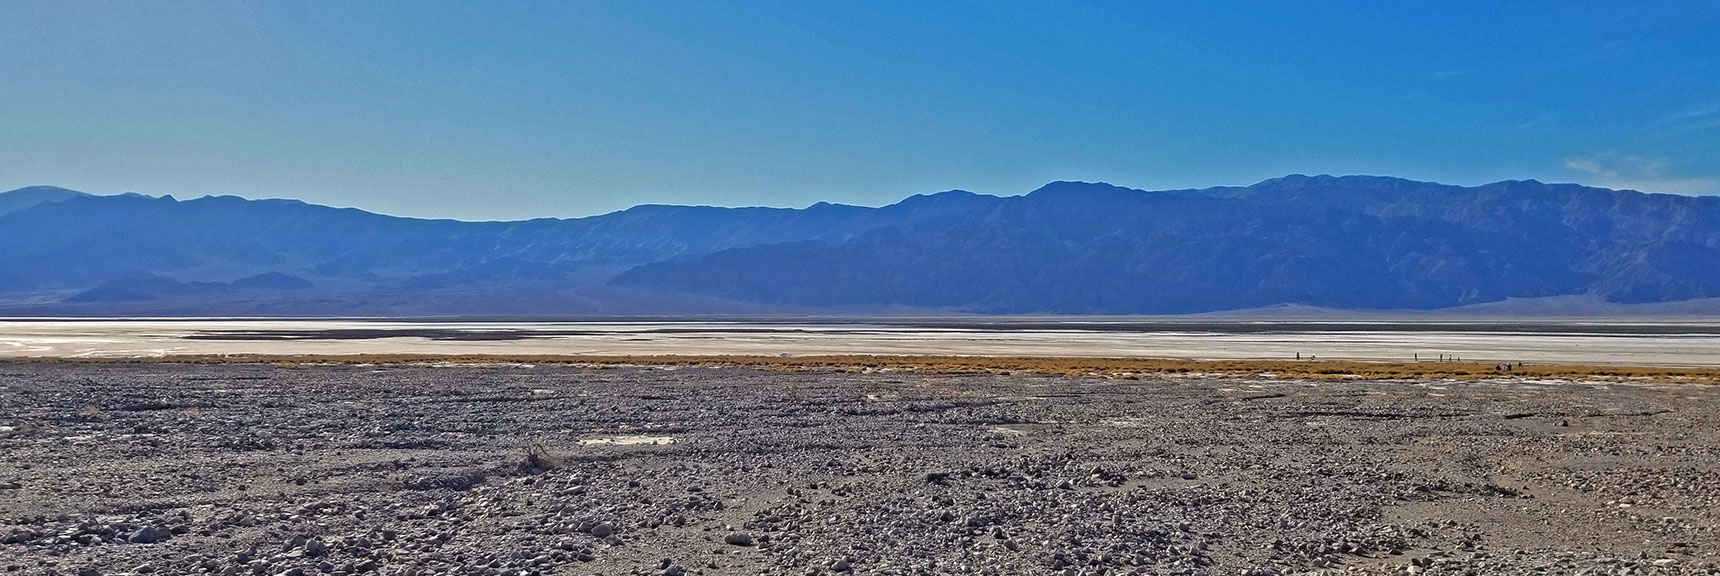 Crossing the Bottom of the Alluvial Fan to the West of Hwy 190. Approaching the Salt Flat. | Return of Lake Manly (Lake in Death Valley) | Death Valley National Park, California